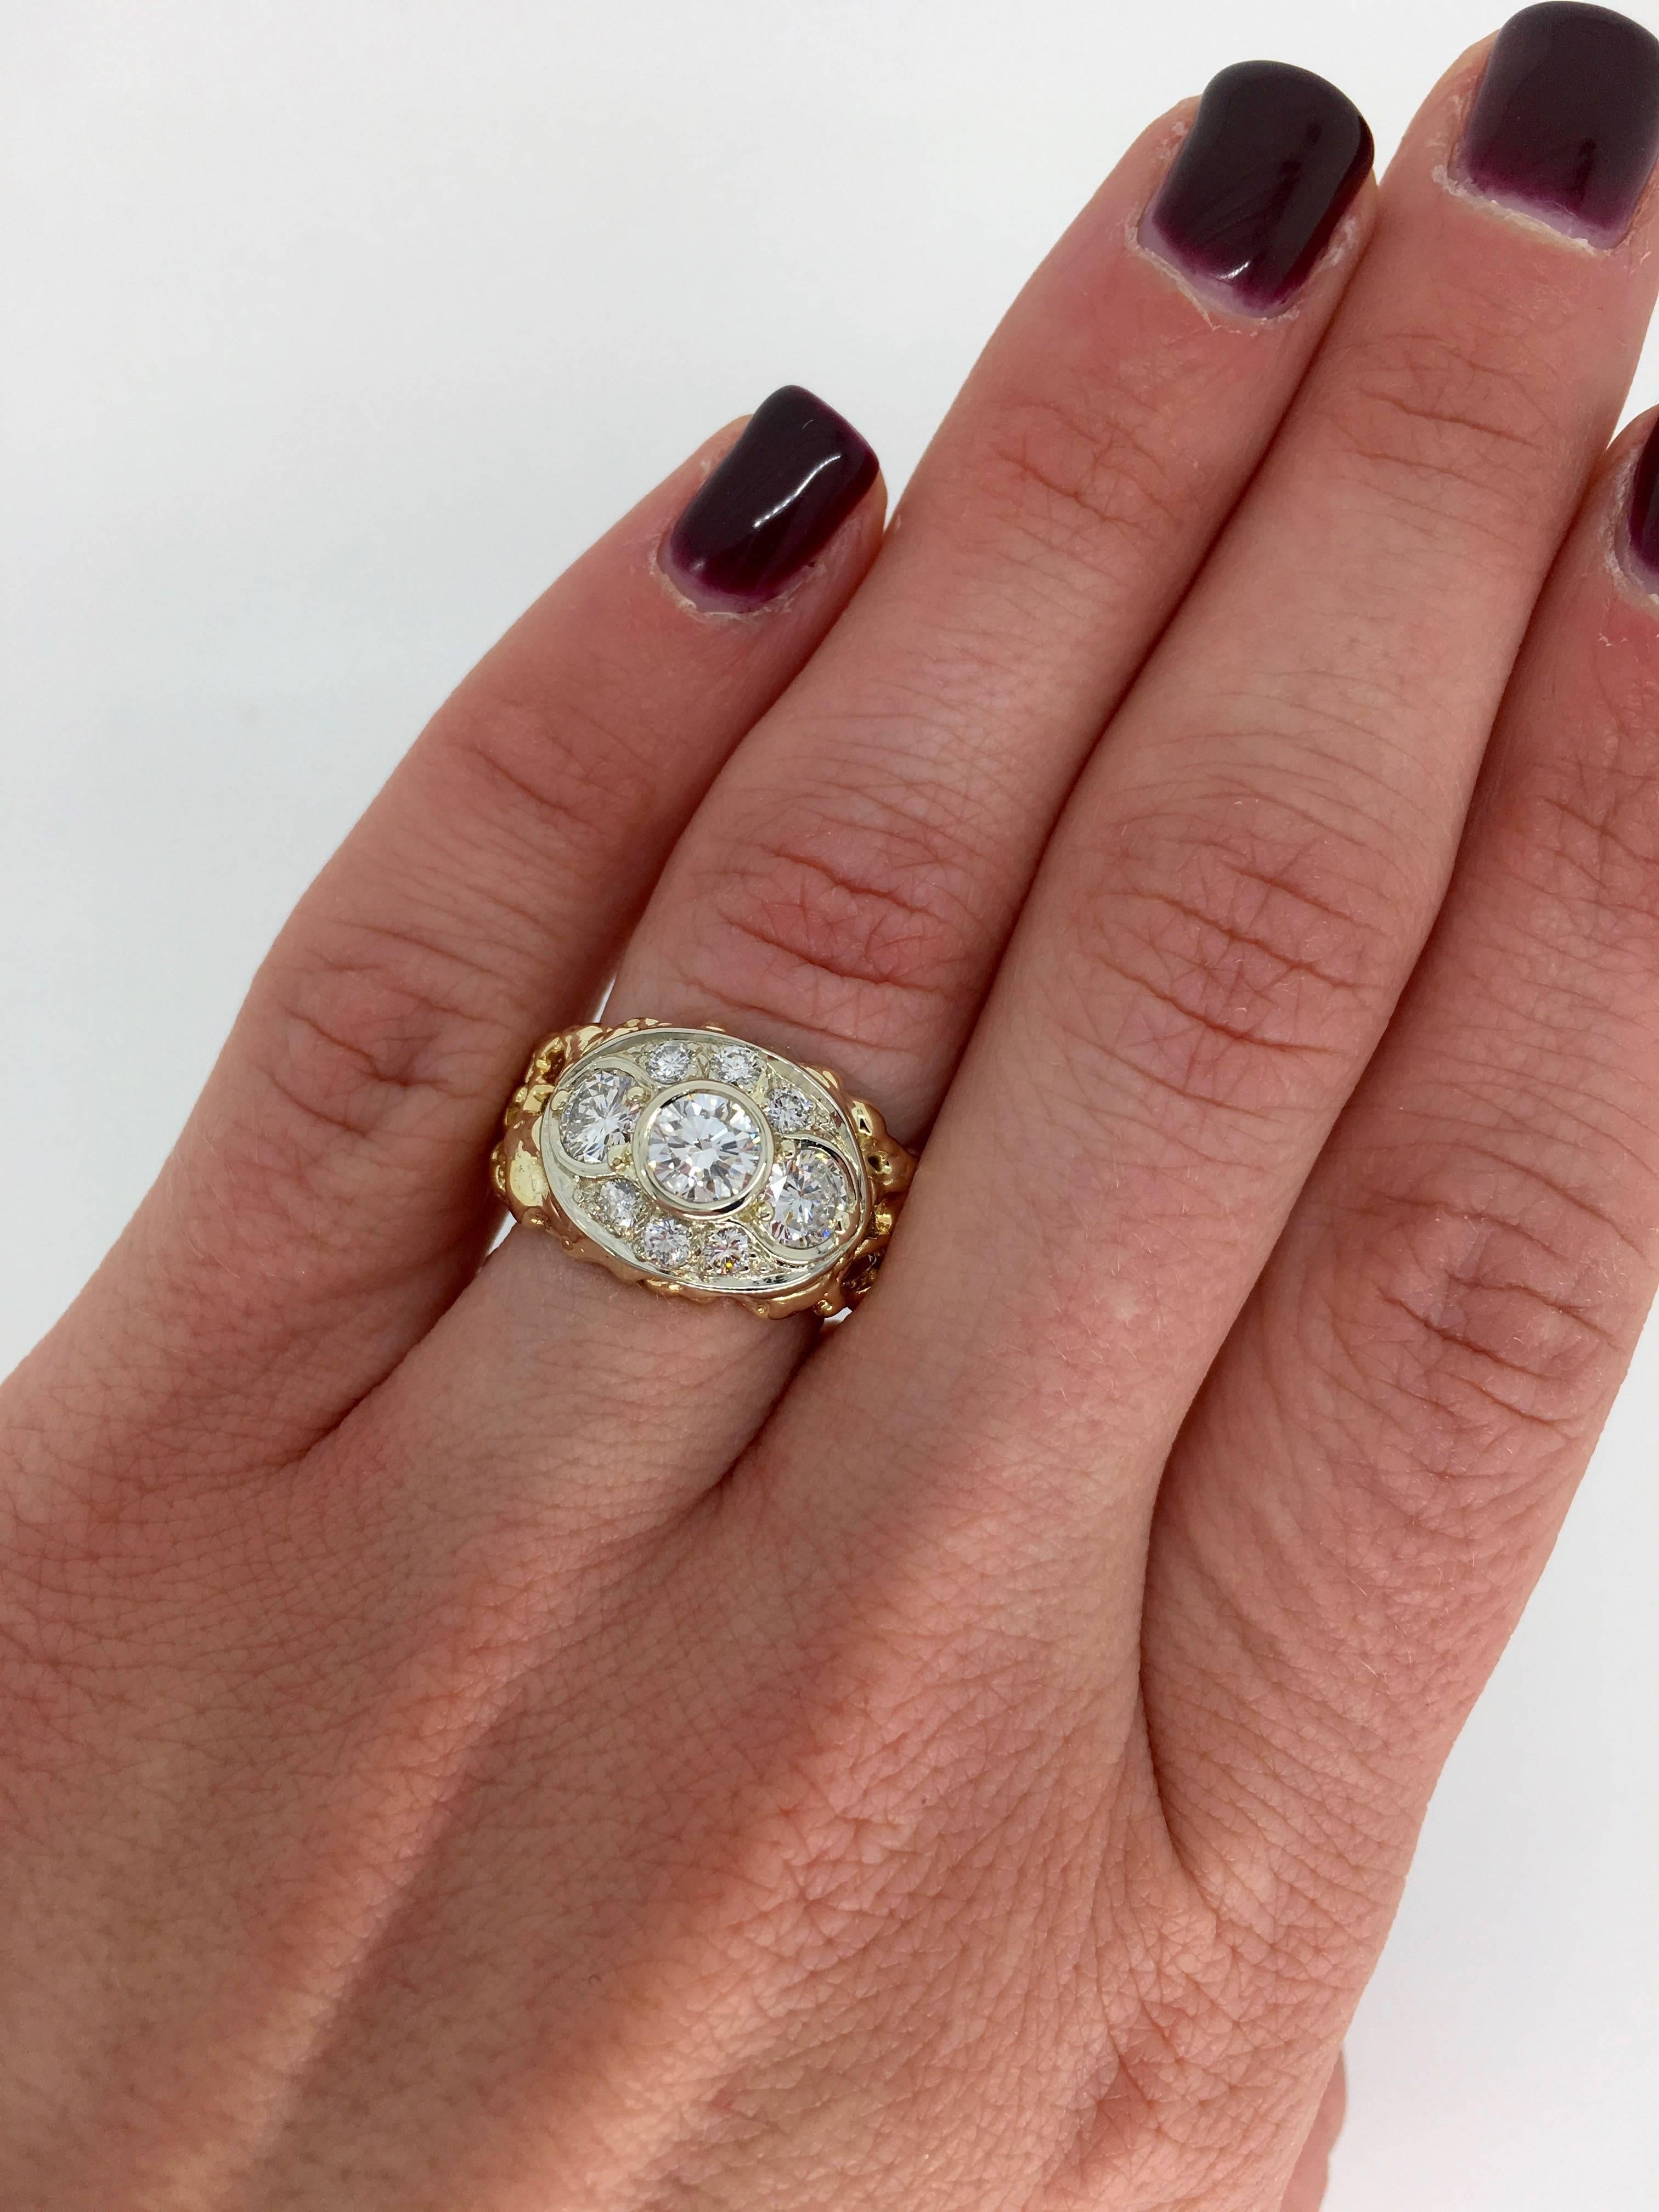 This beautiful ring features an approximately .55CT Round Brilliant Cut Diamond, with an approximately .33CT, and an approximately .32CT Round Brilliant Cut Diamond on either side. The three-featured diamonds display an average color of G-I and